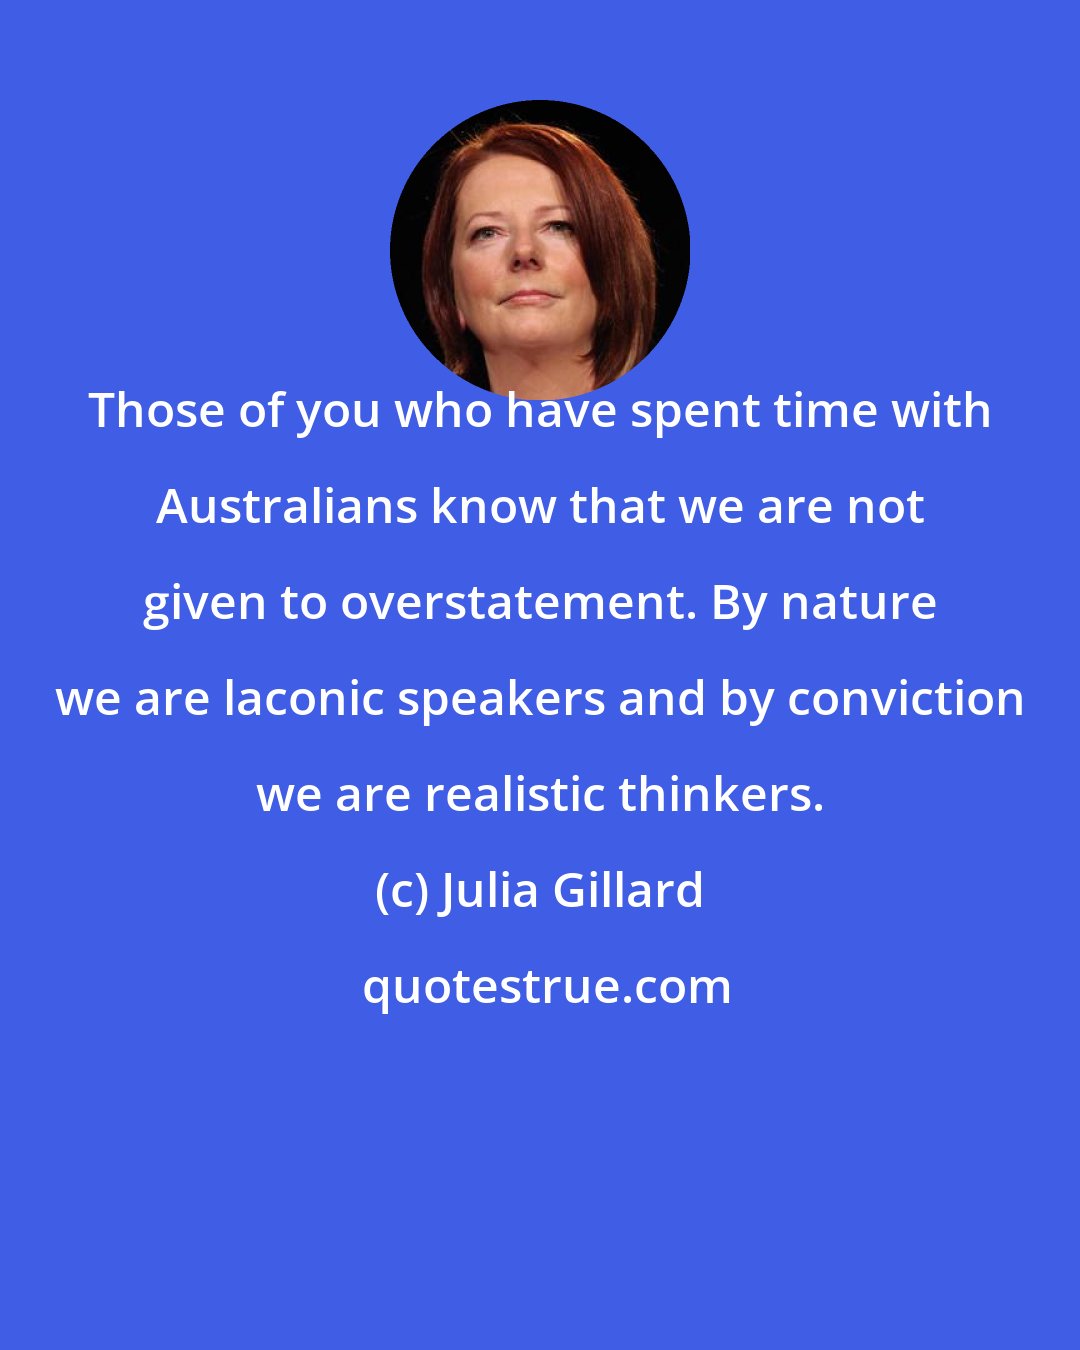 Julia Gillard: Those of you who have spent time with Australians know that we are not given to overstatement. By nature we are laconic speakers and by conviction we are realistic thinkers.